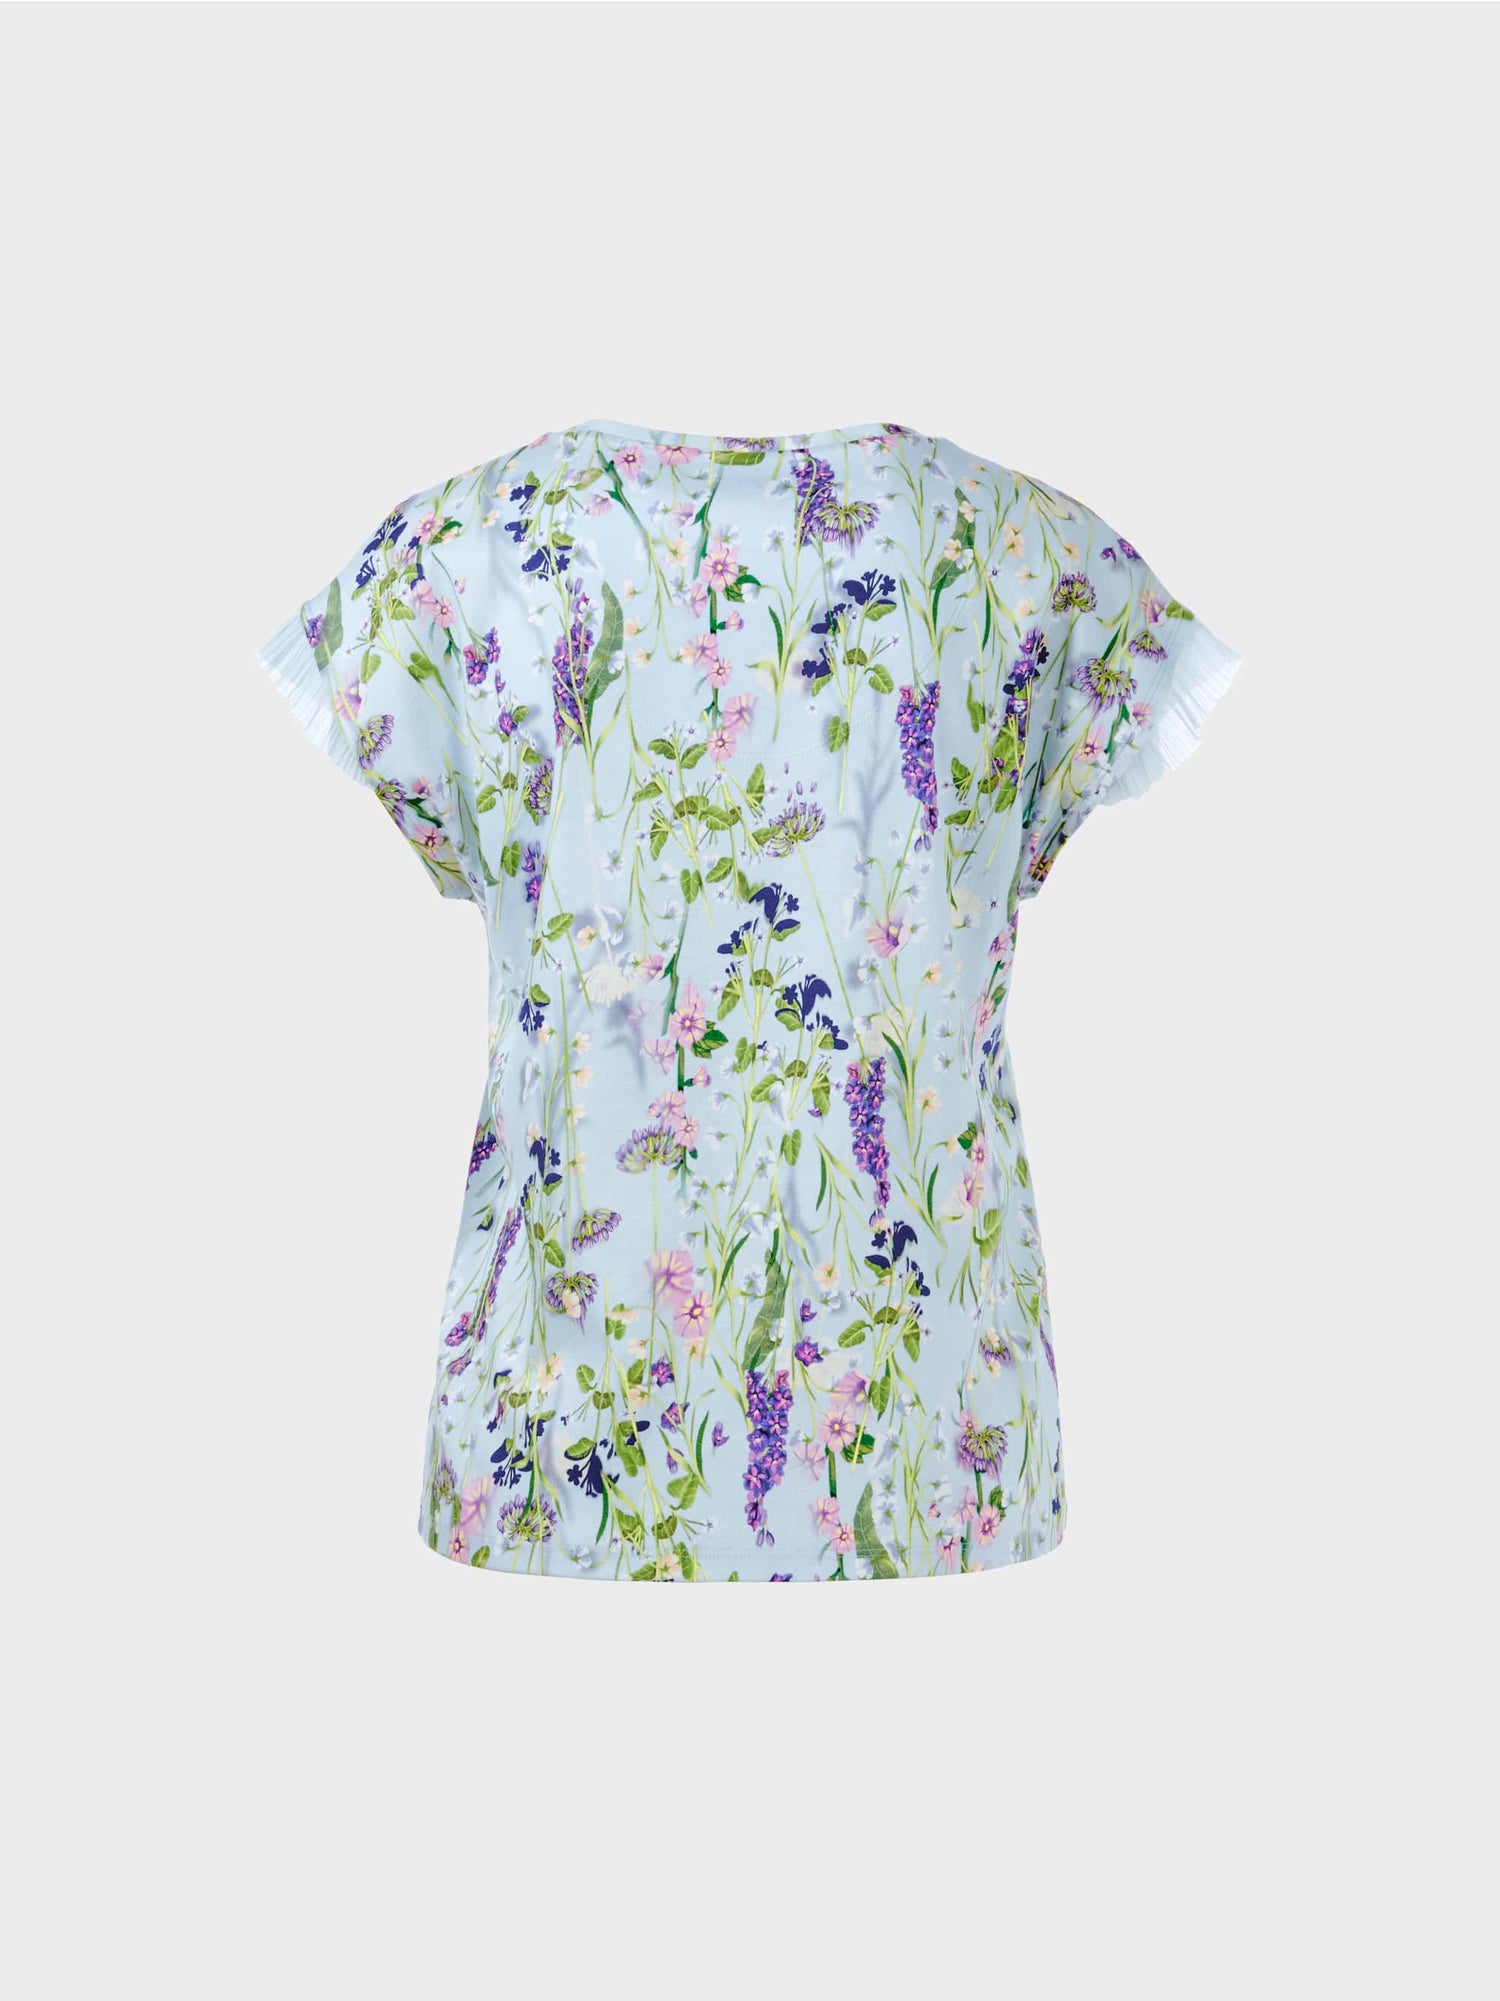 T-Shirt With Floral Design_WC 48.23 J19_320_08